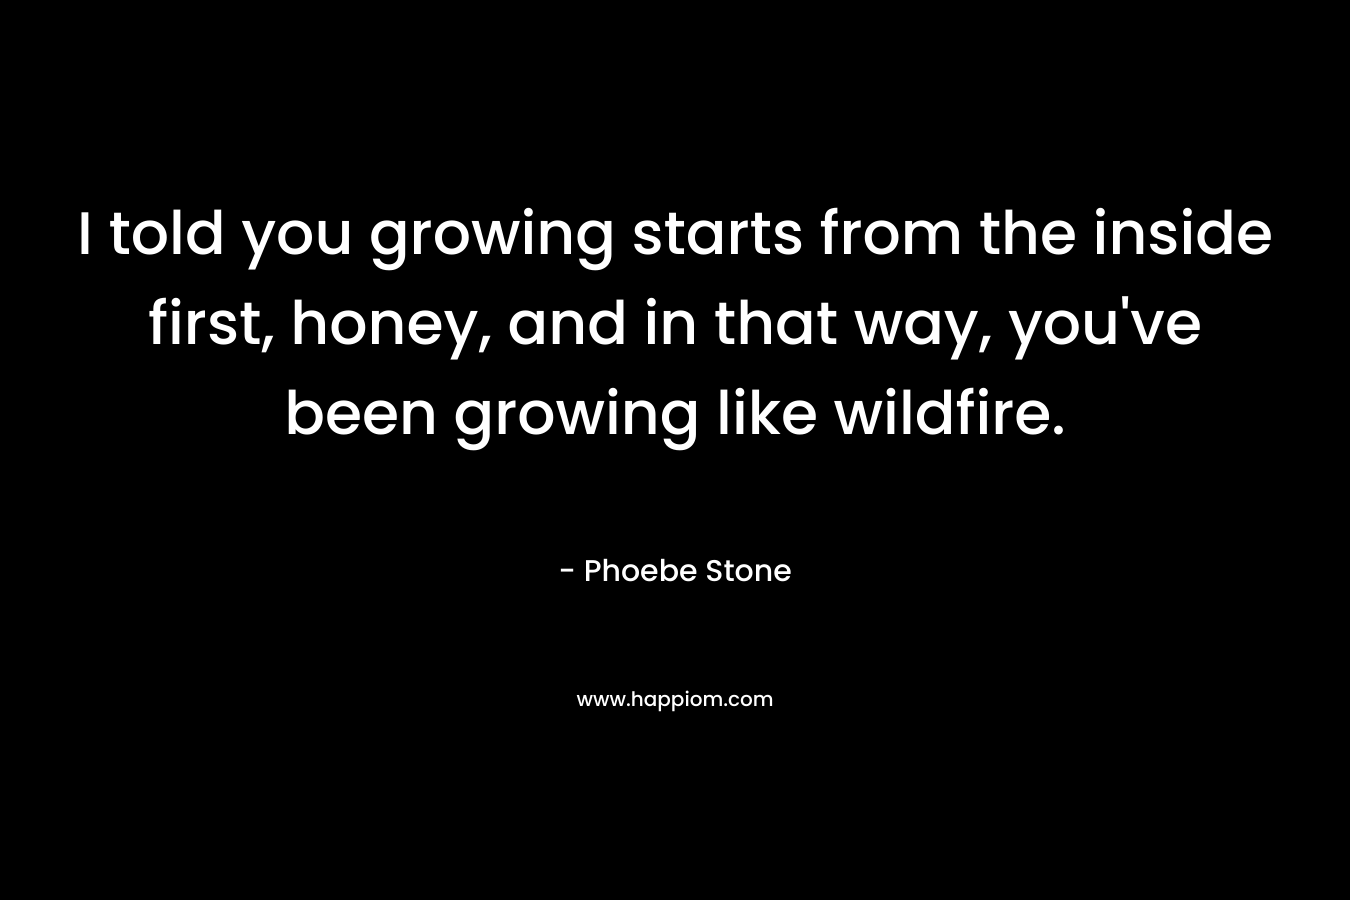 I told you growing starts from the inside first, honey, and in that way, you've been growing like wildfire.